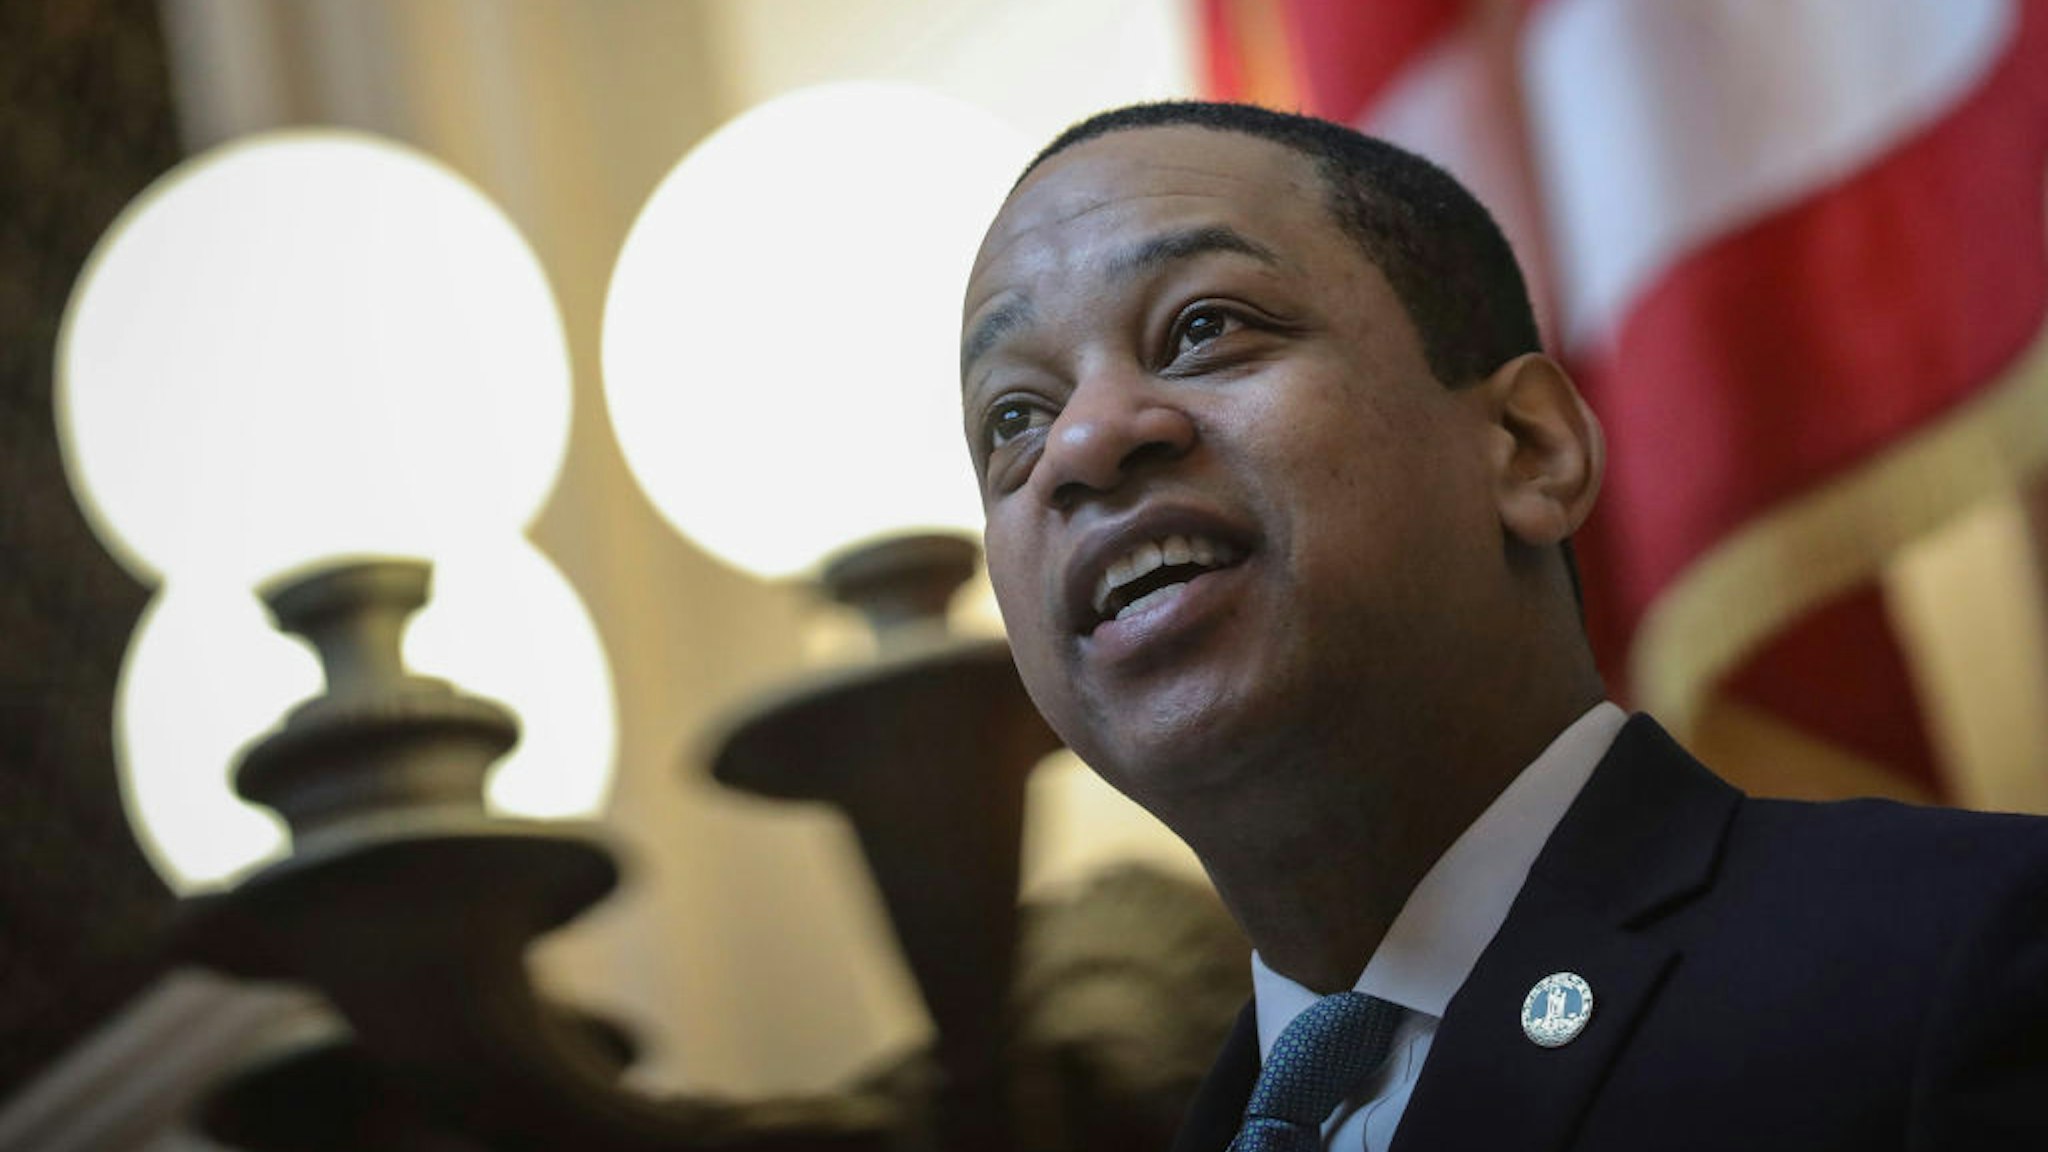 Virginia Lt. Governor Justin Fairfax presides over the Senate at the Virginia State Capitol, February 7, 2019 in Richmond, Virginia.